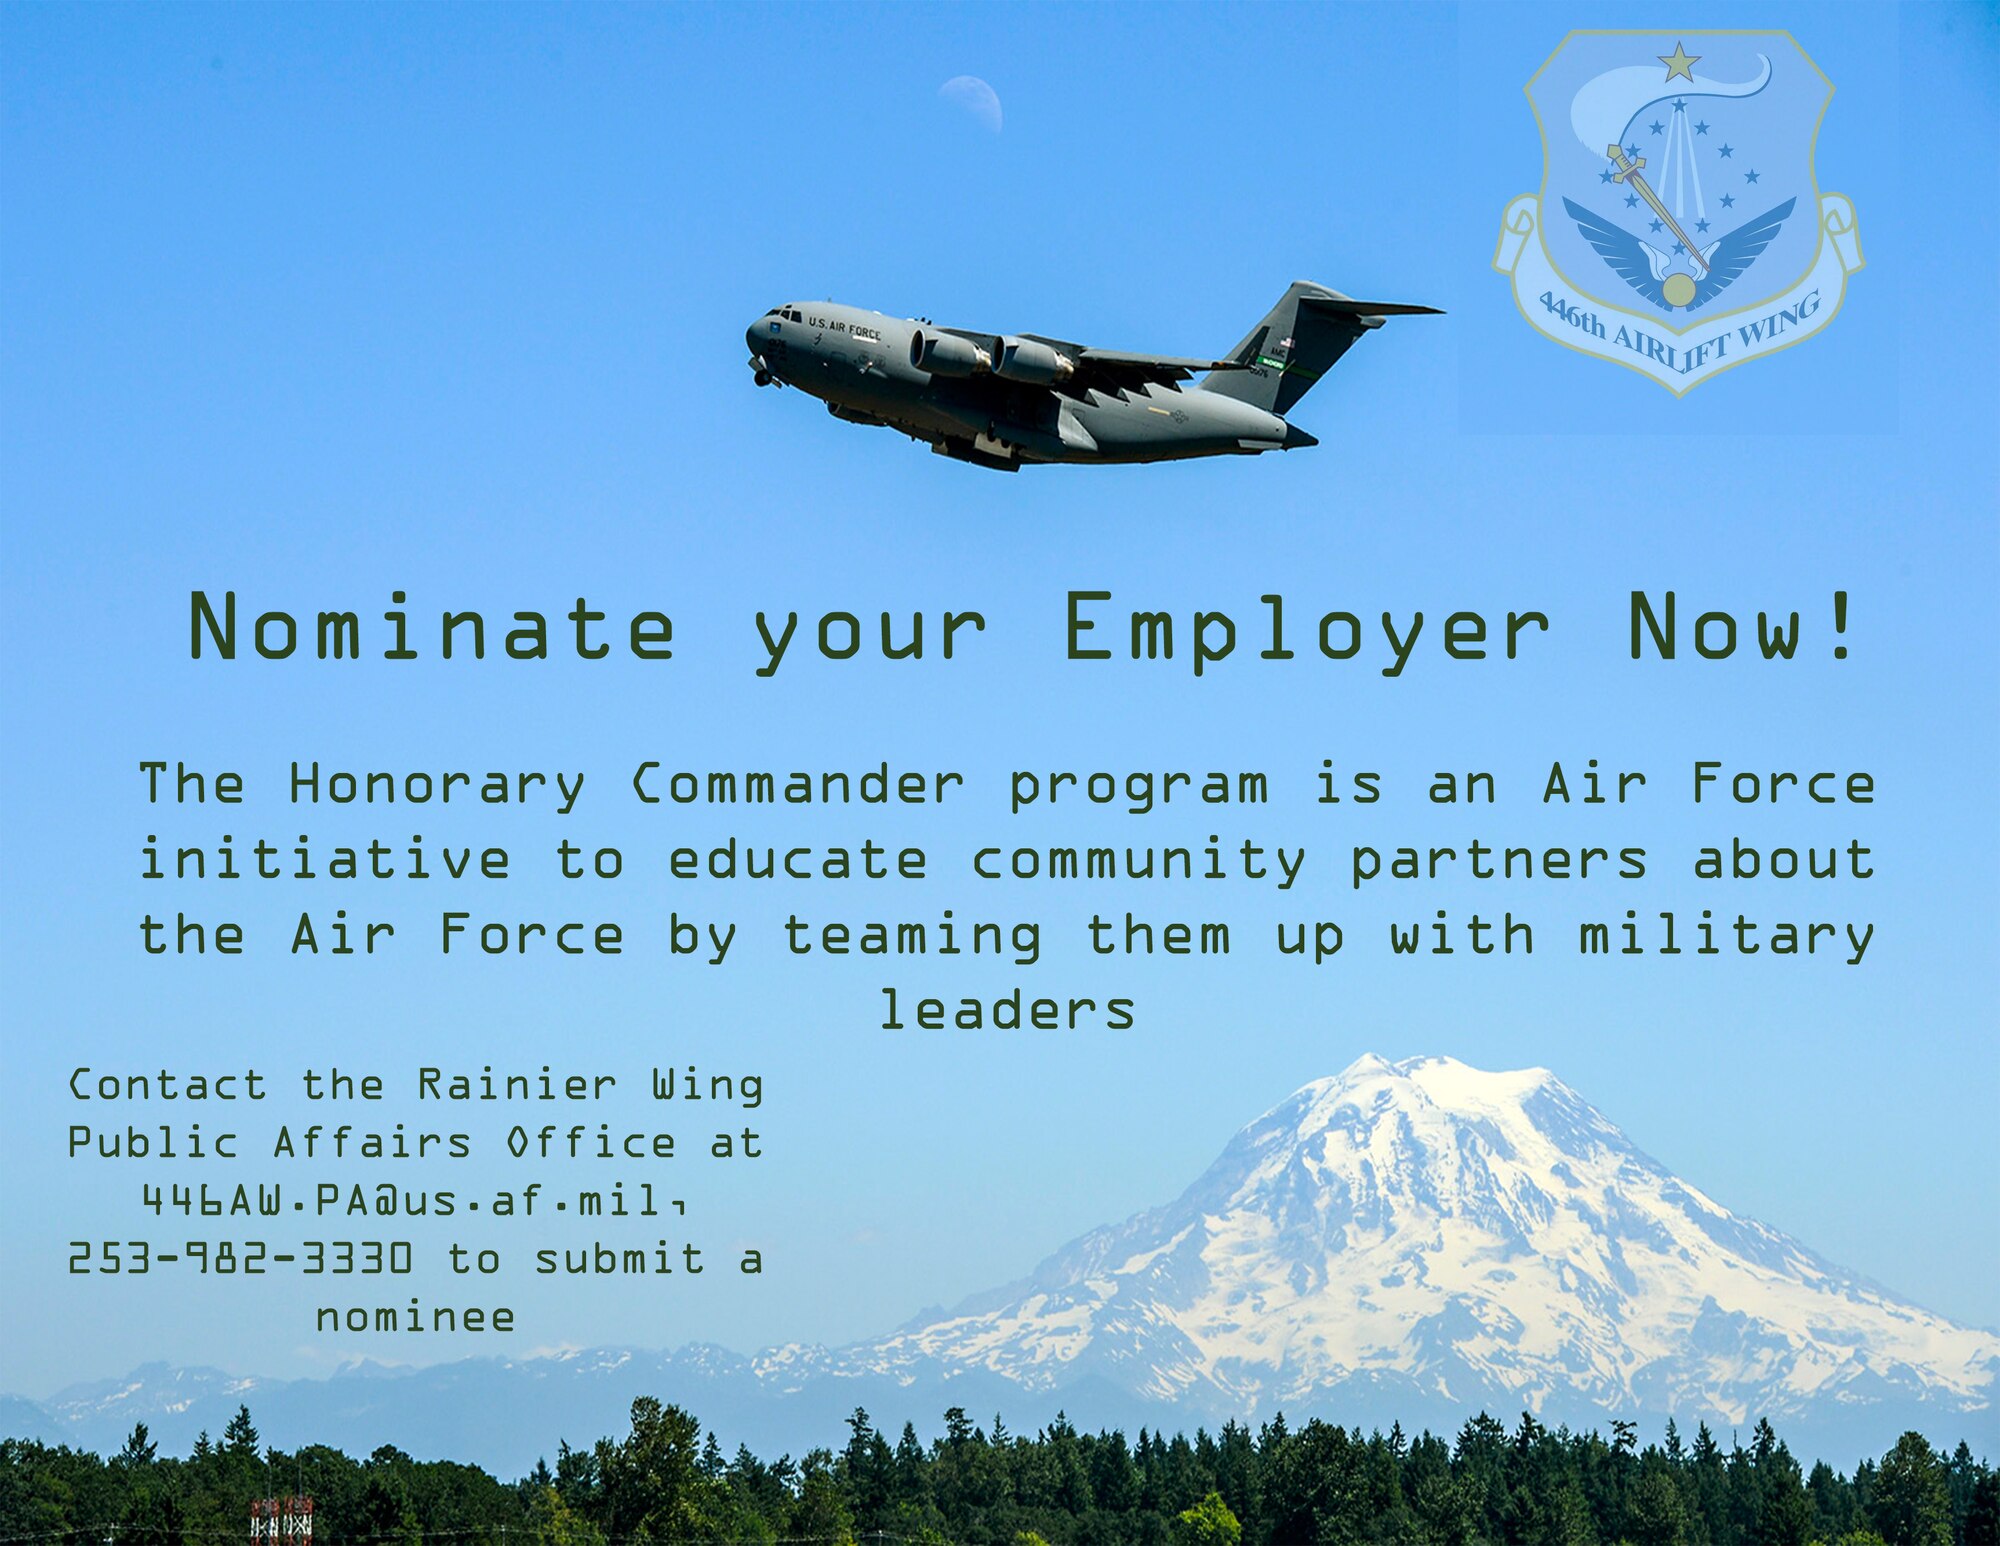 The Honorary Commander program is an Air Force initiative to educate community partners about the Air Force by teaming them up with military leaders. The Rainier Wing Public Affairs Office is looking for civic leaders and employers to pair up with our military leadership as part of this program. 
